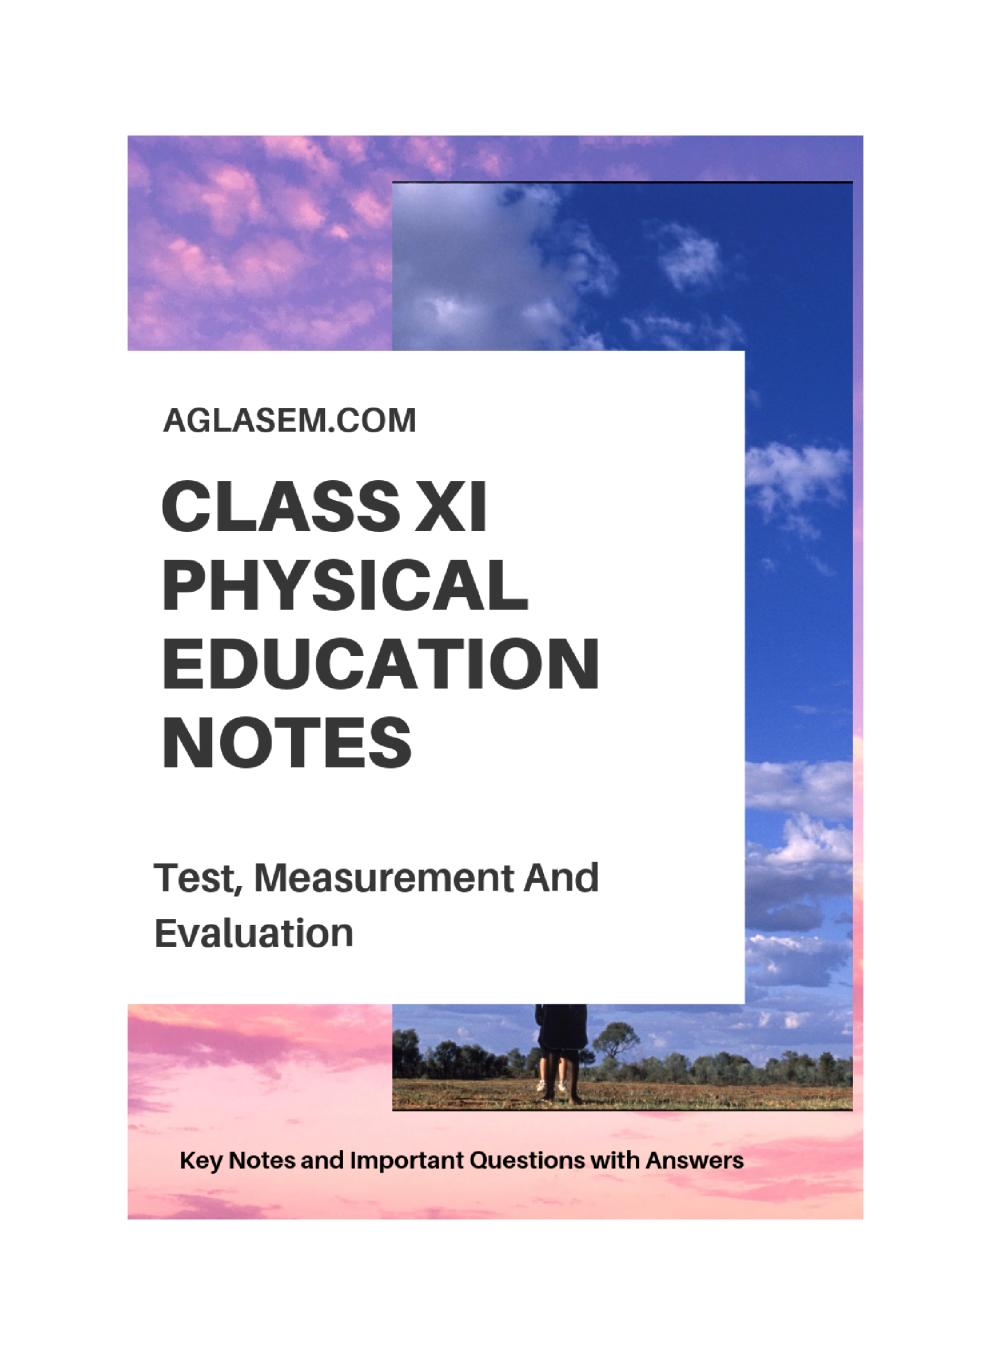 Class 11 Physical Education Notes for Test, Measurement and Evaluation - Page 1